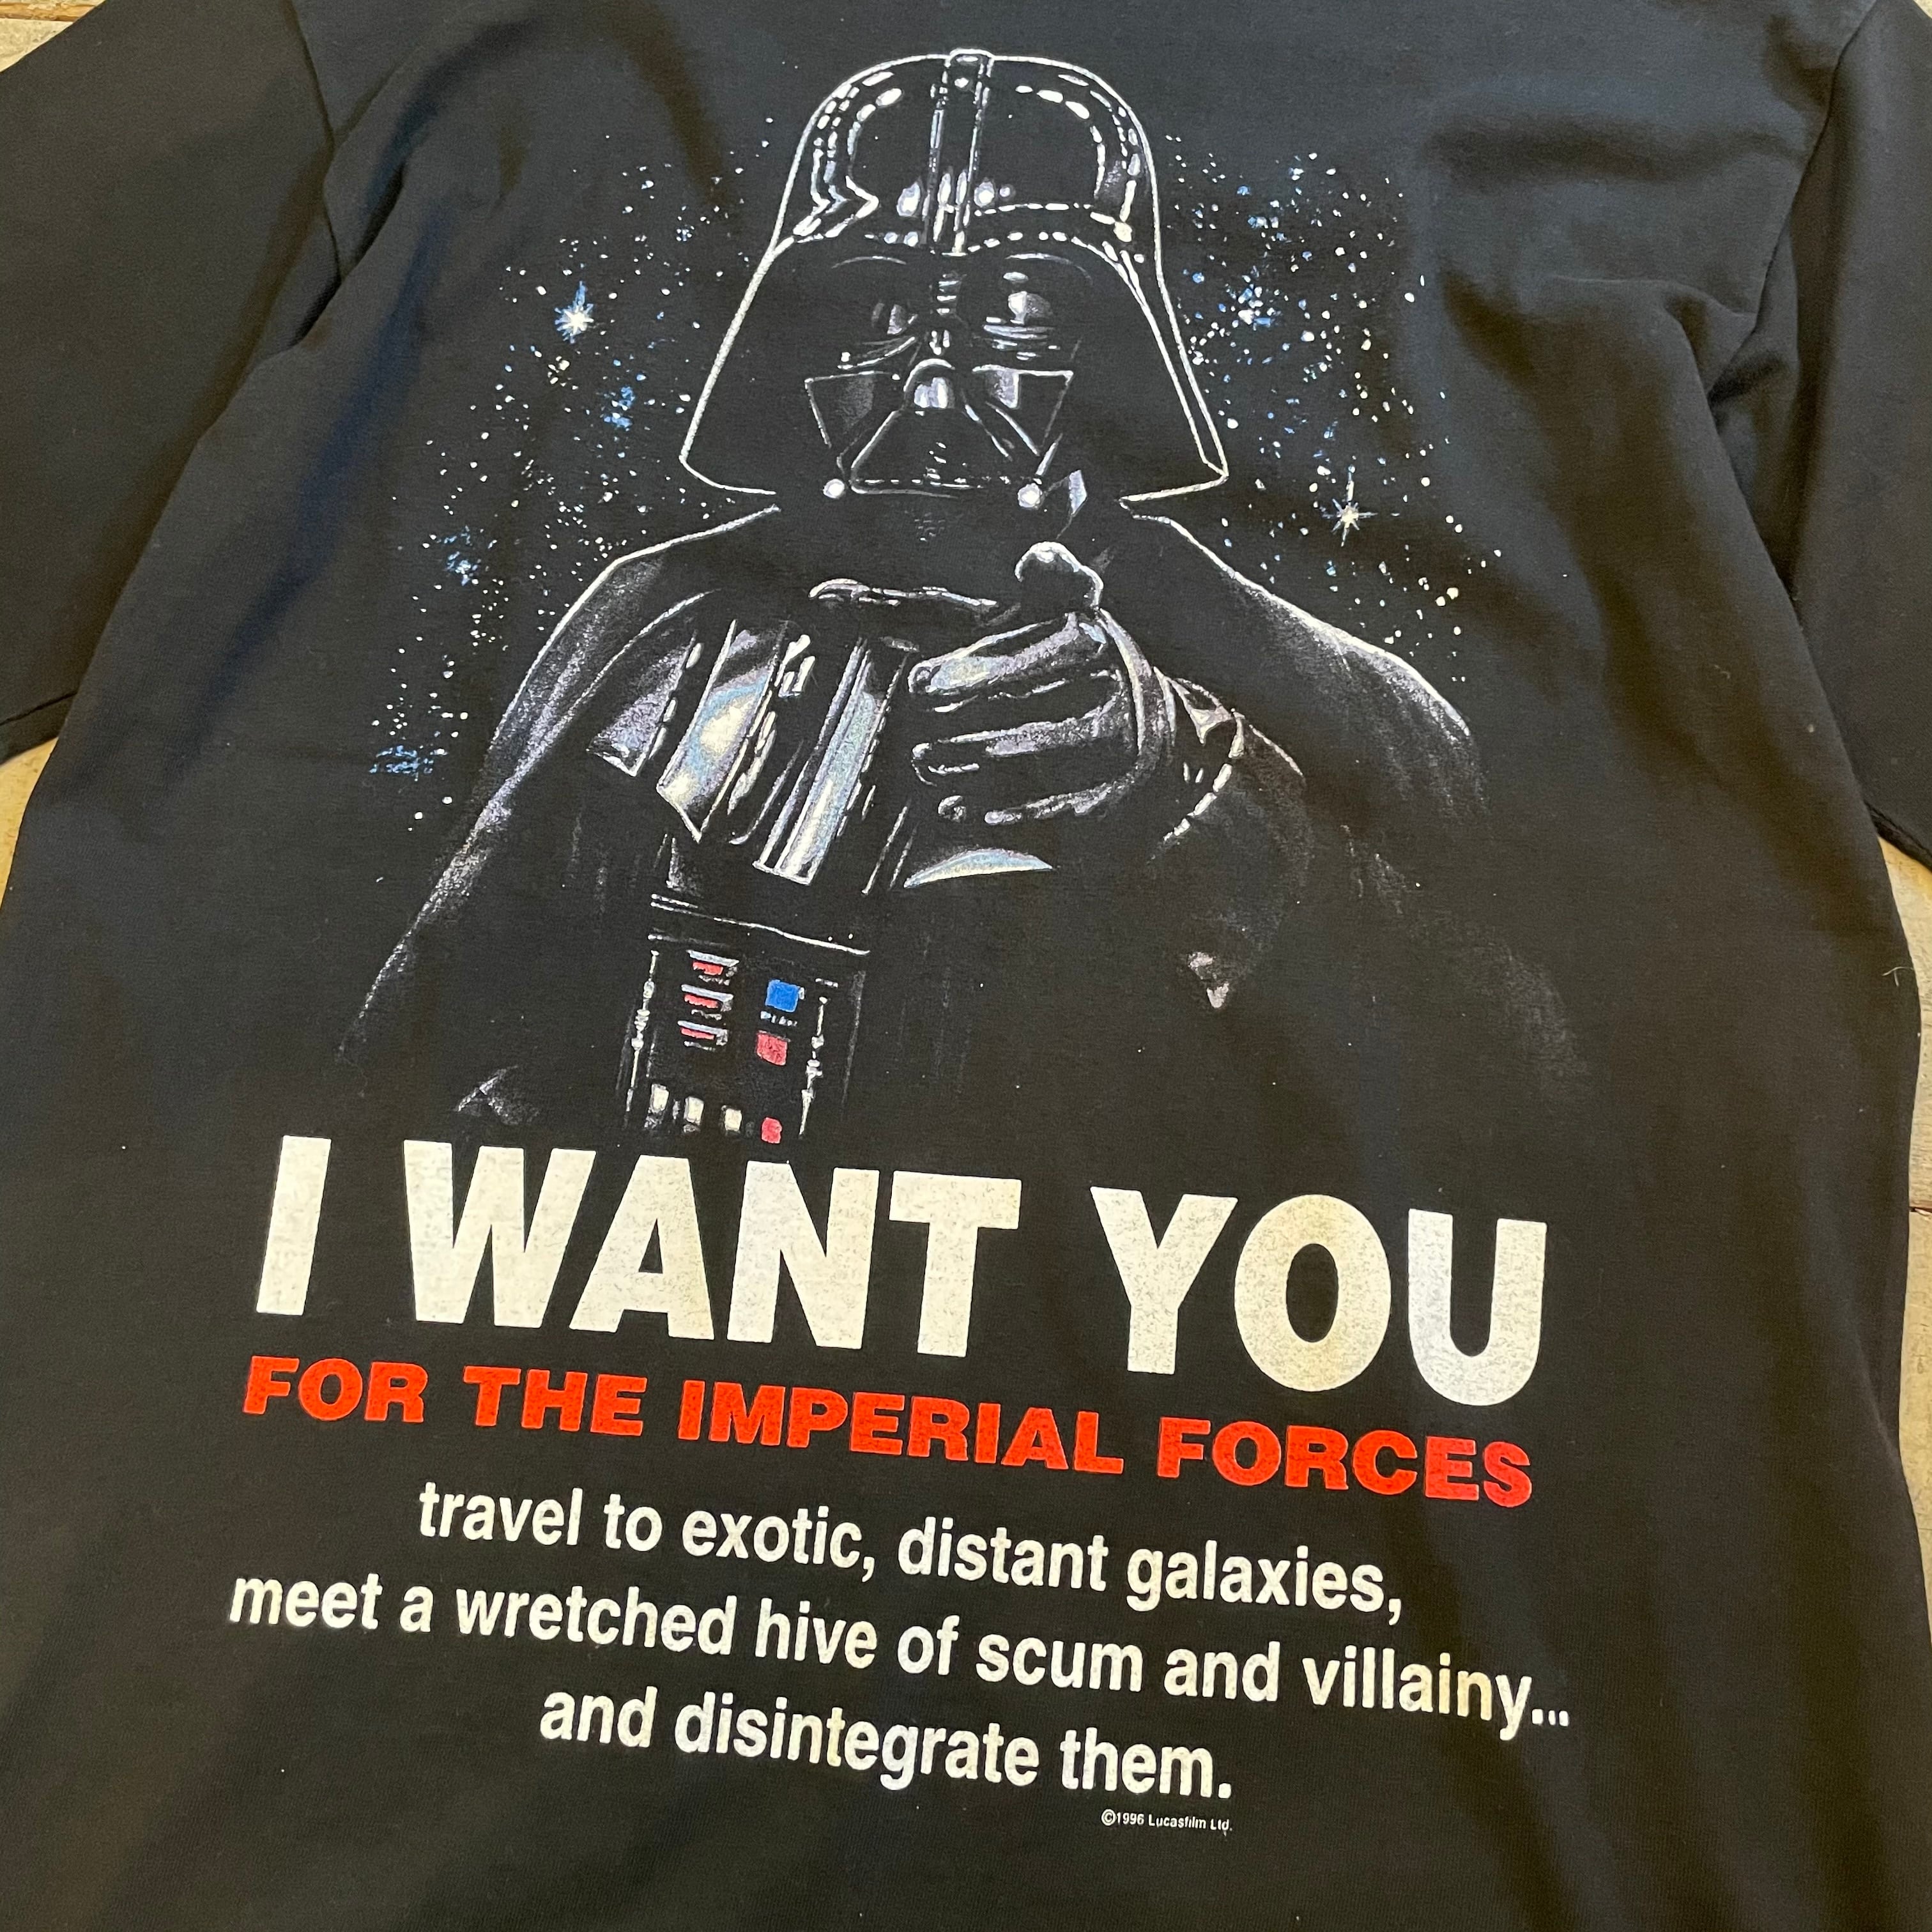 1996s STAR WARS darthvader "I WANT YOU" T-shirt What'z up